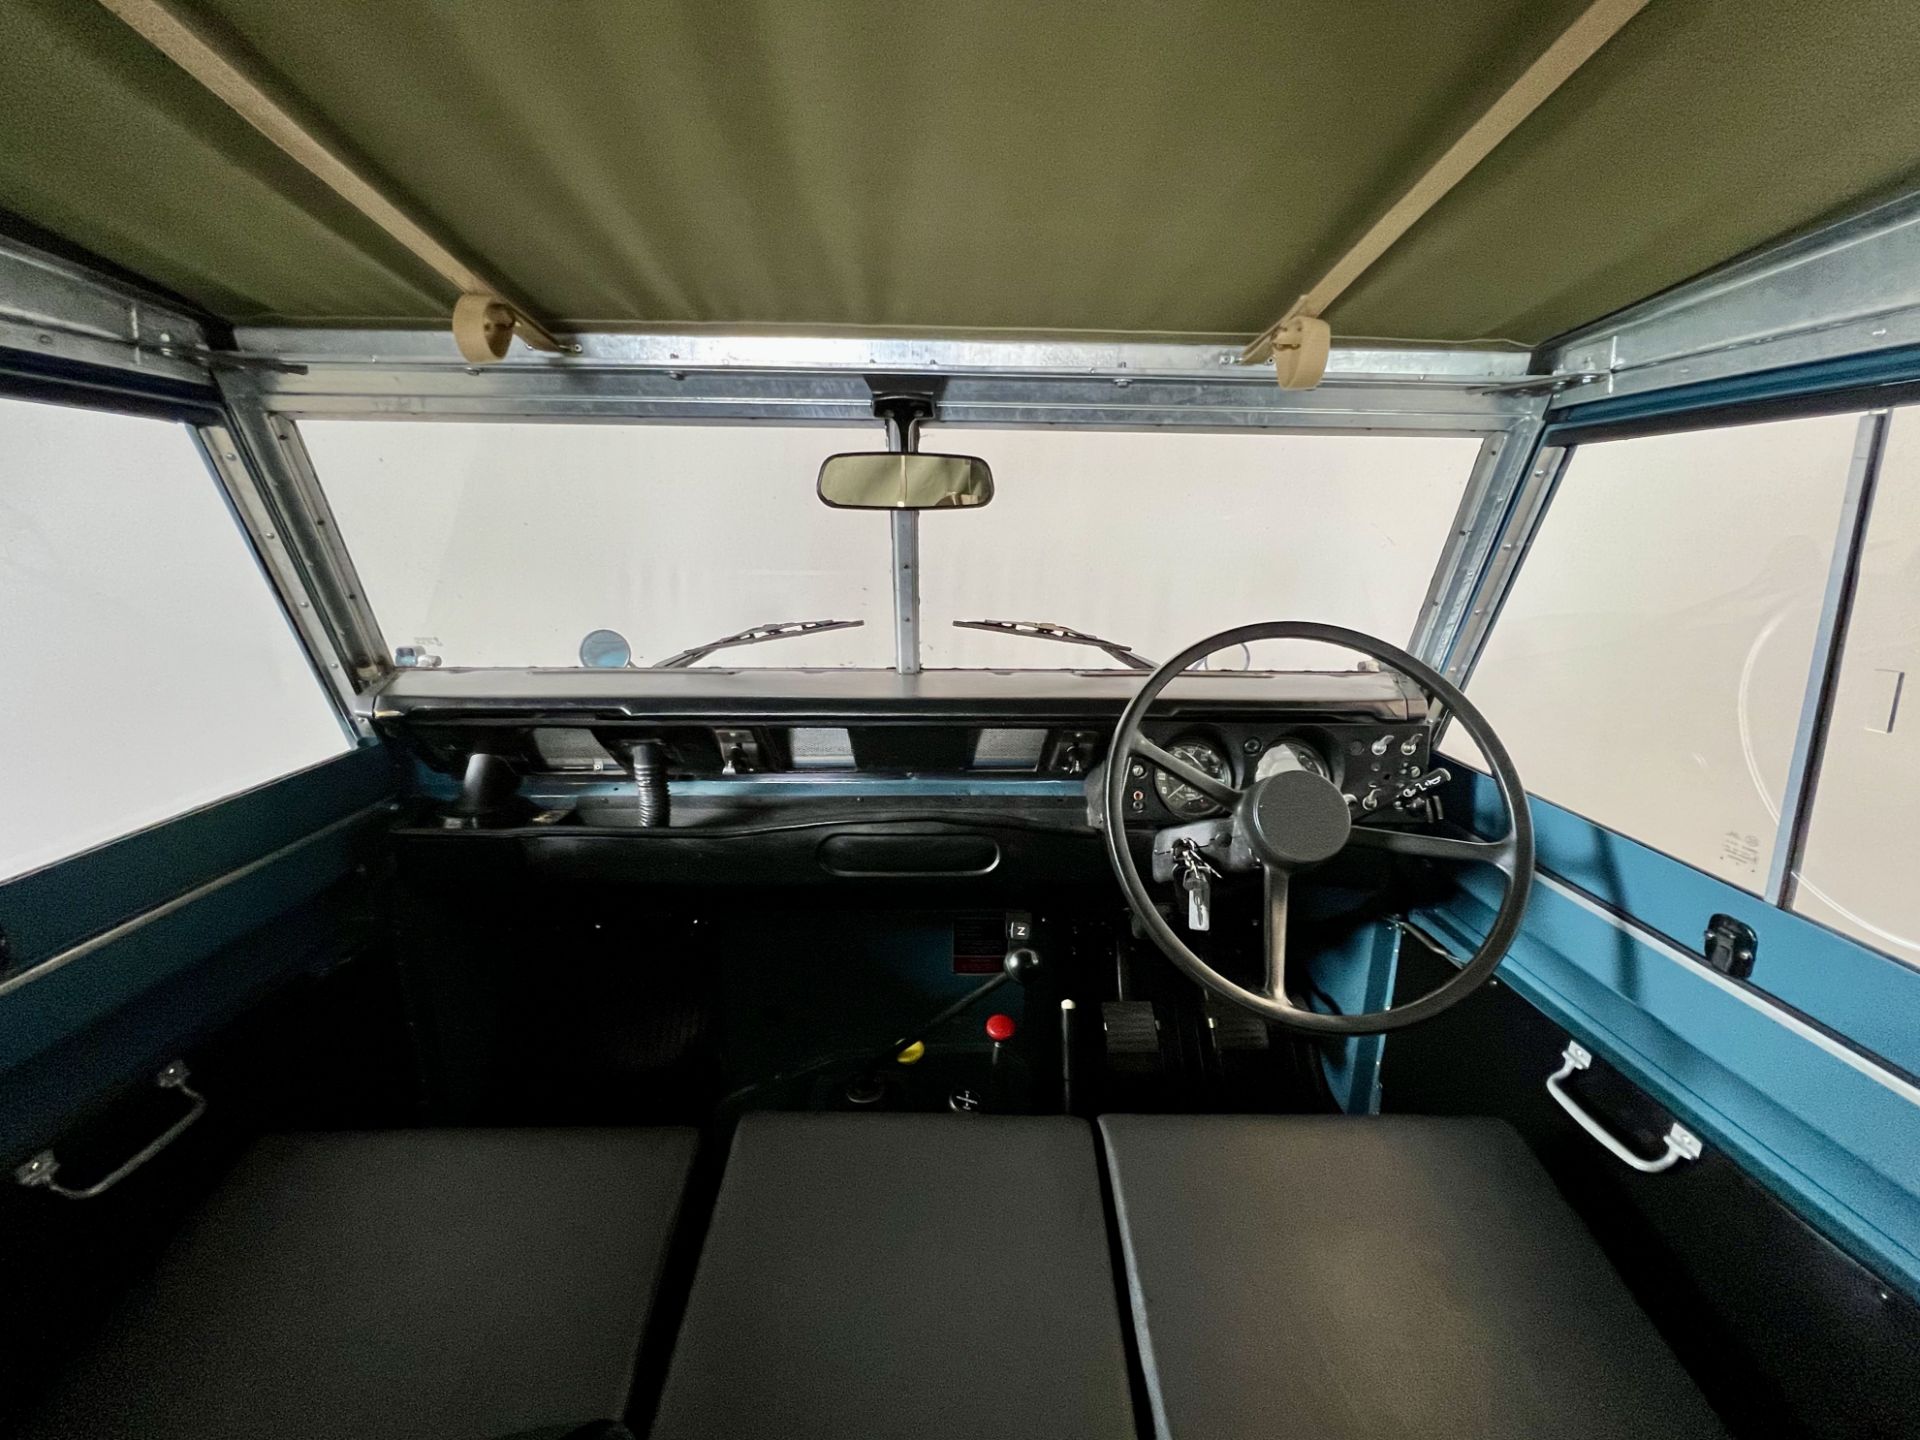 Land Rover Series 3 - Image 31 of 43